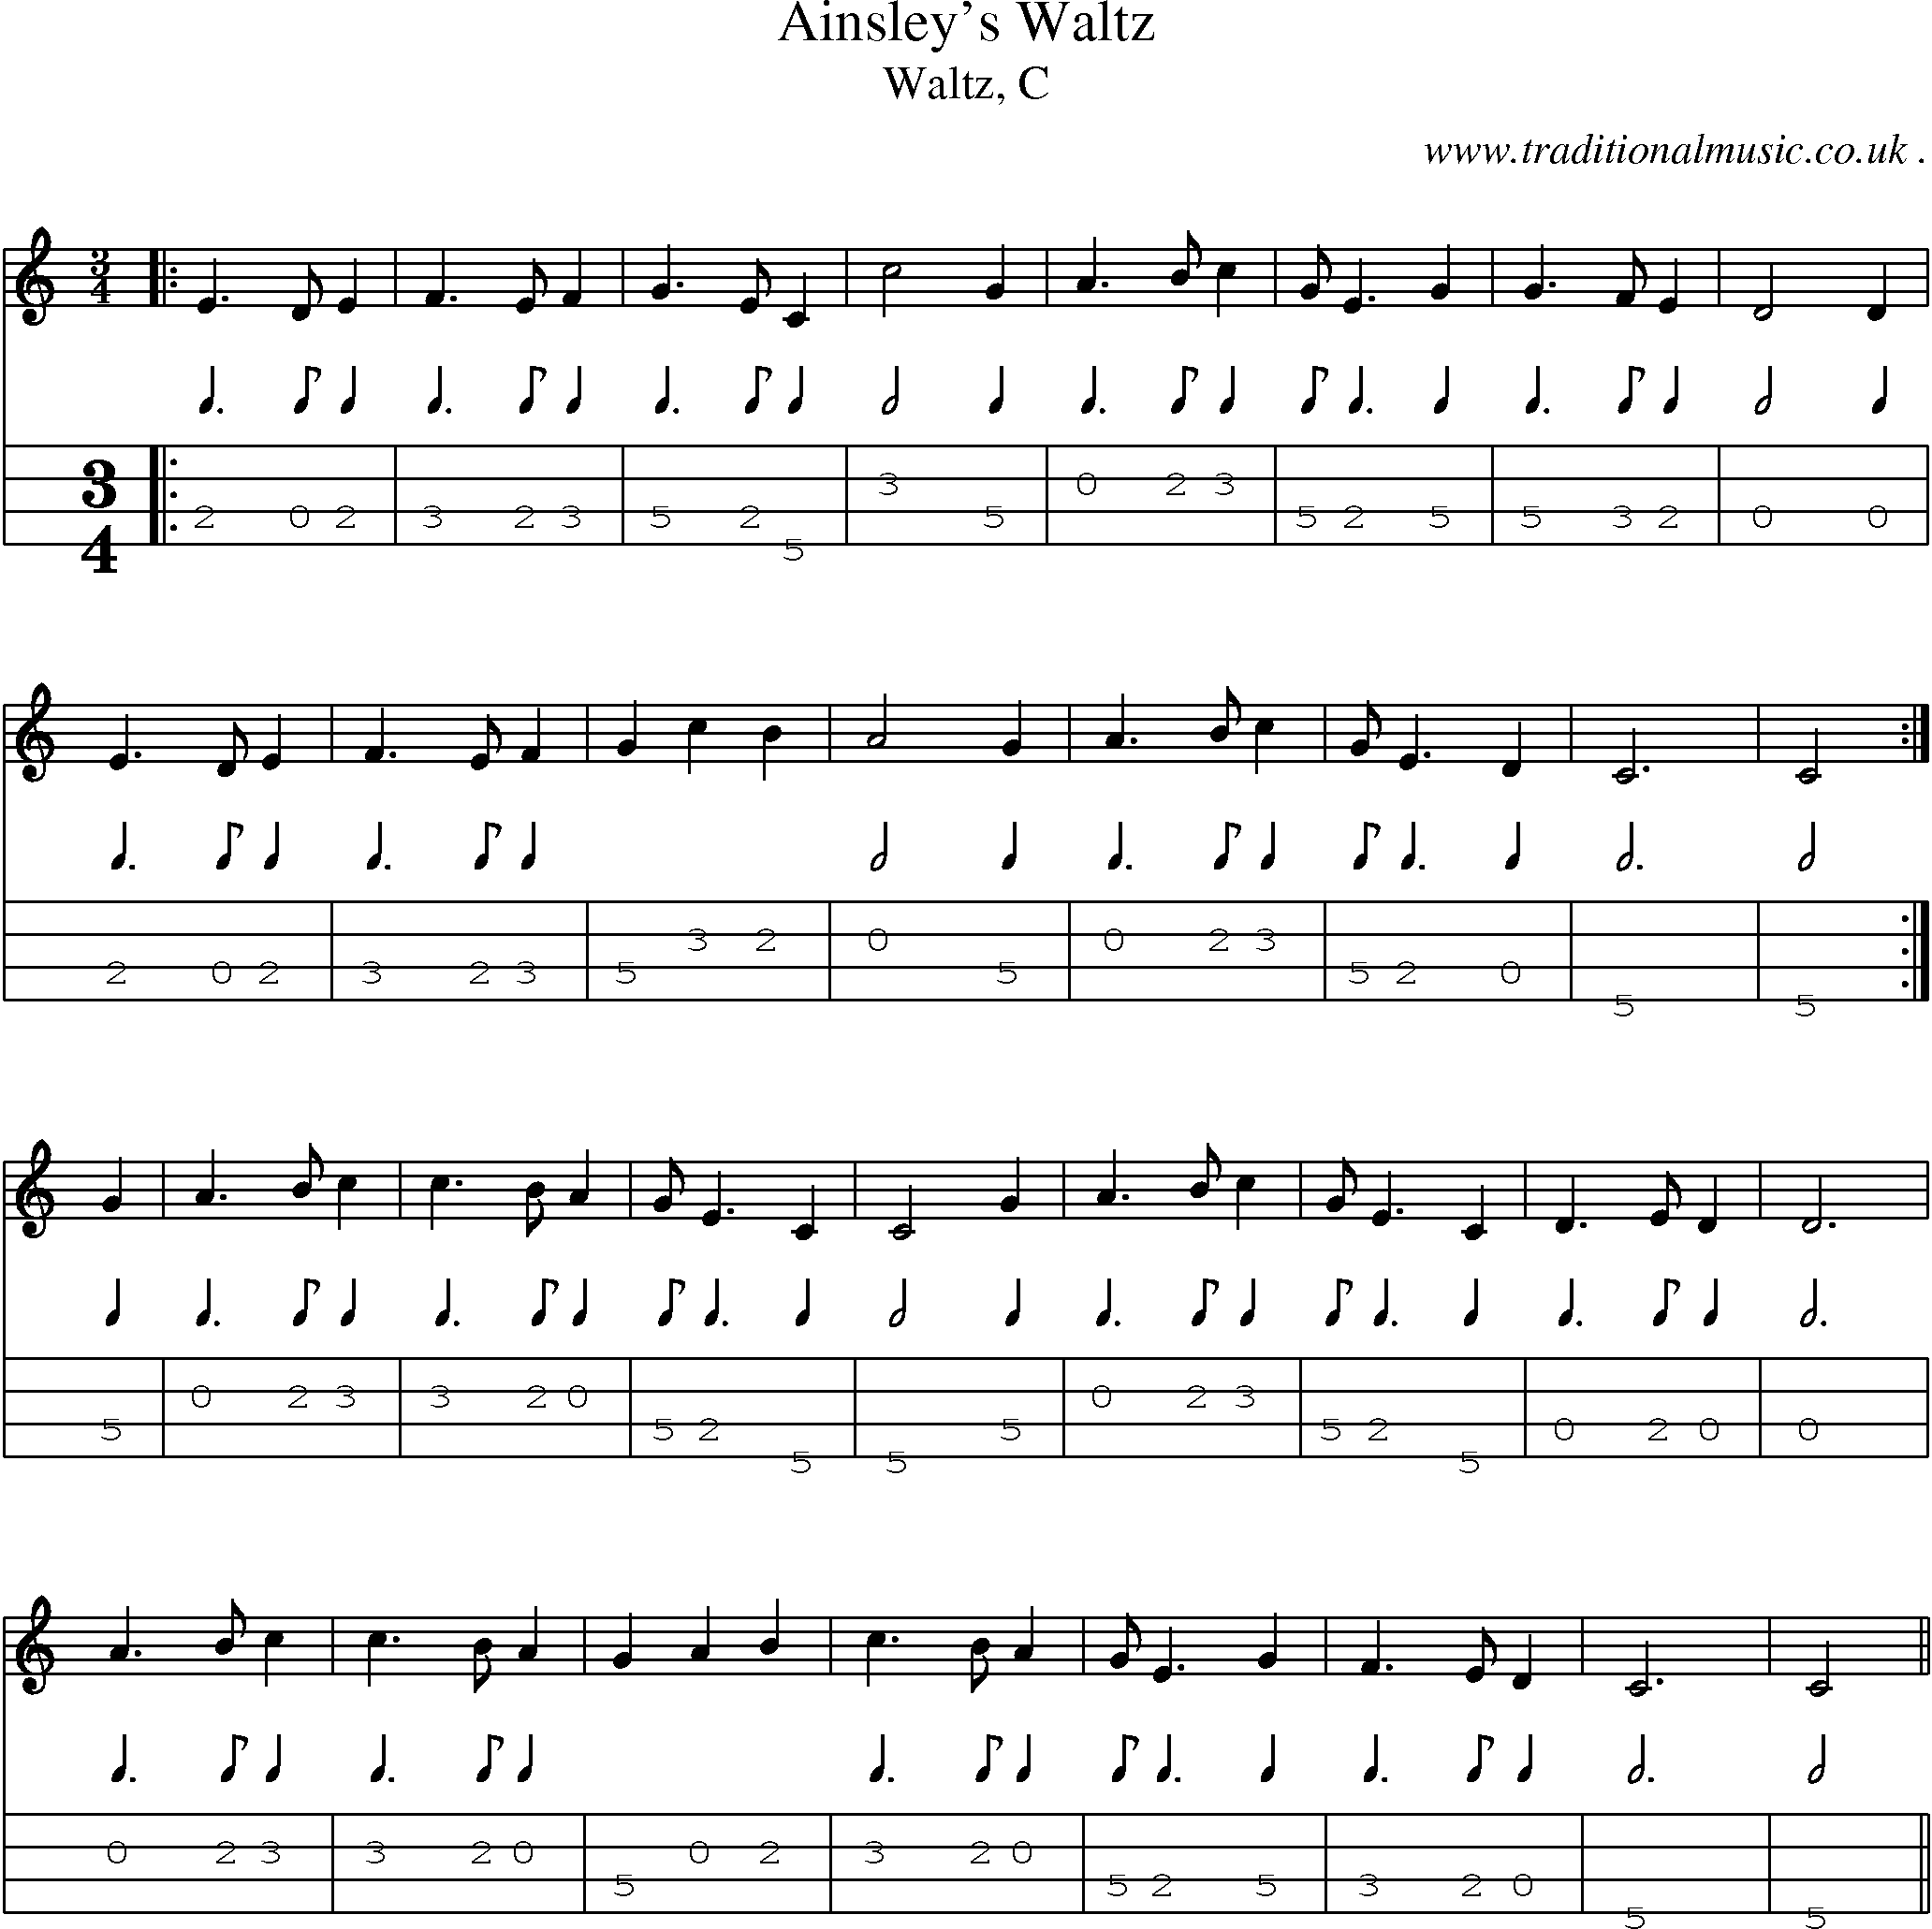 Sheet-music  score, Chords and Mandolin Tabs for Ainsleys Waltz